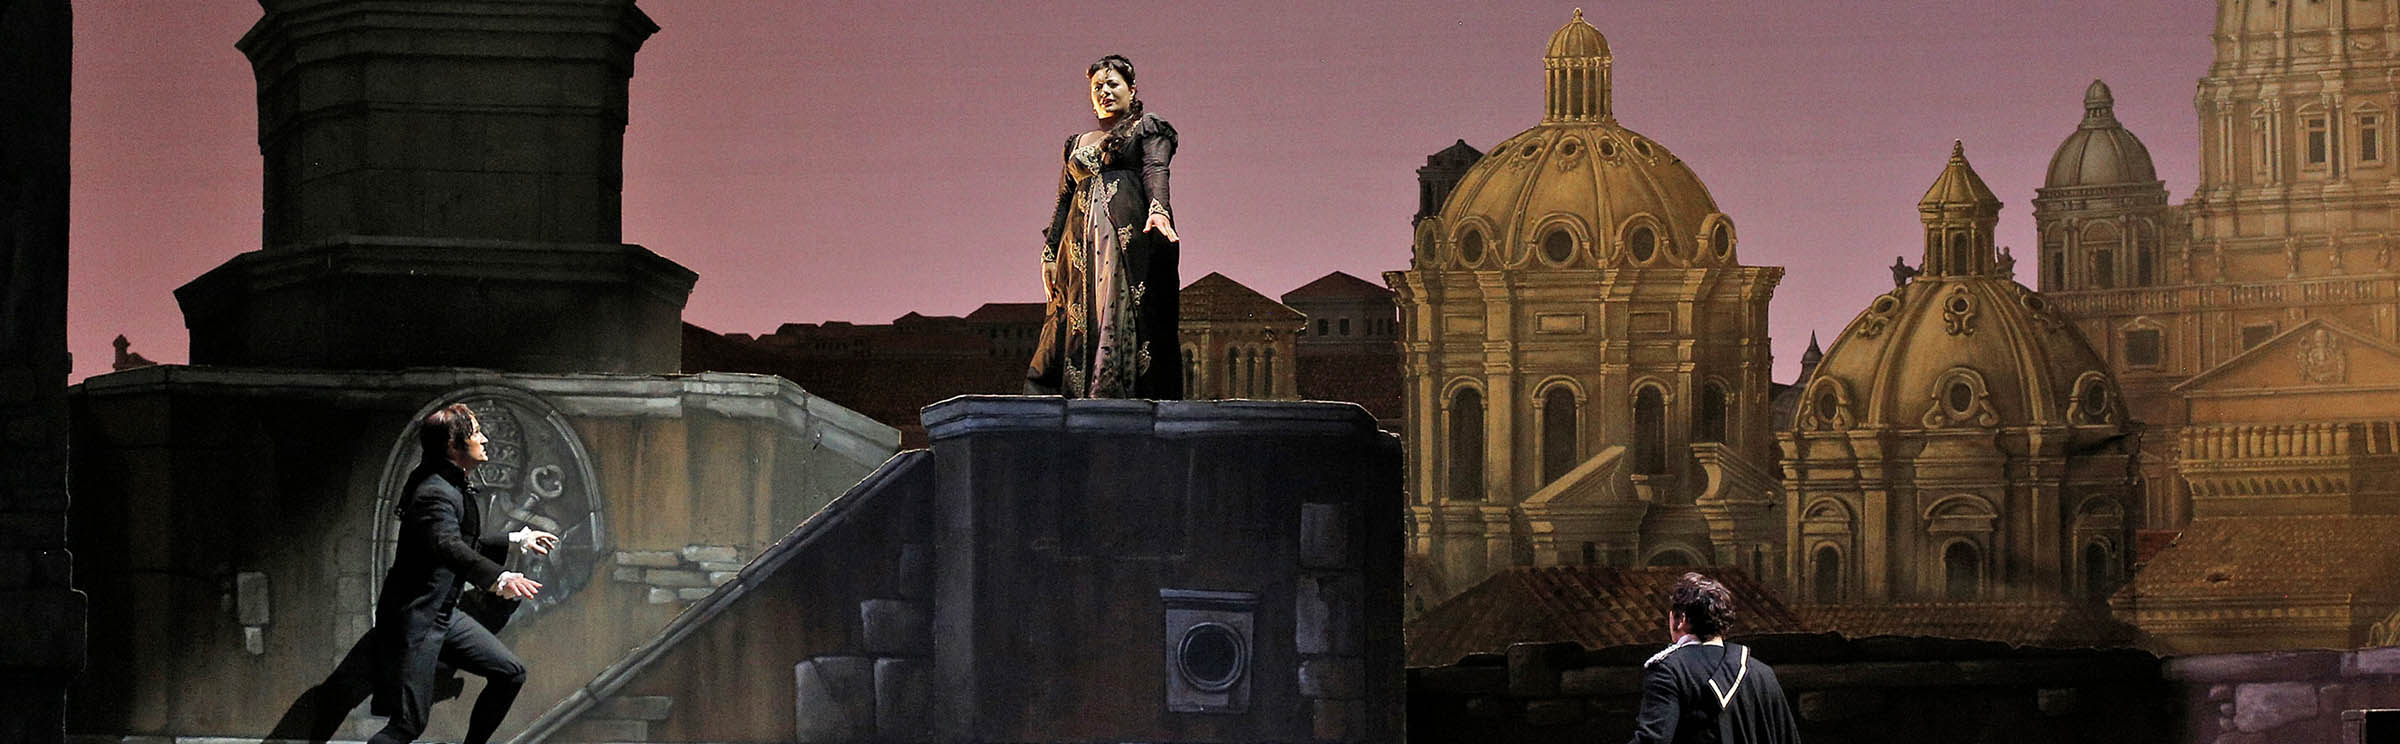 The 10 Best Operas of All Time